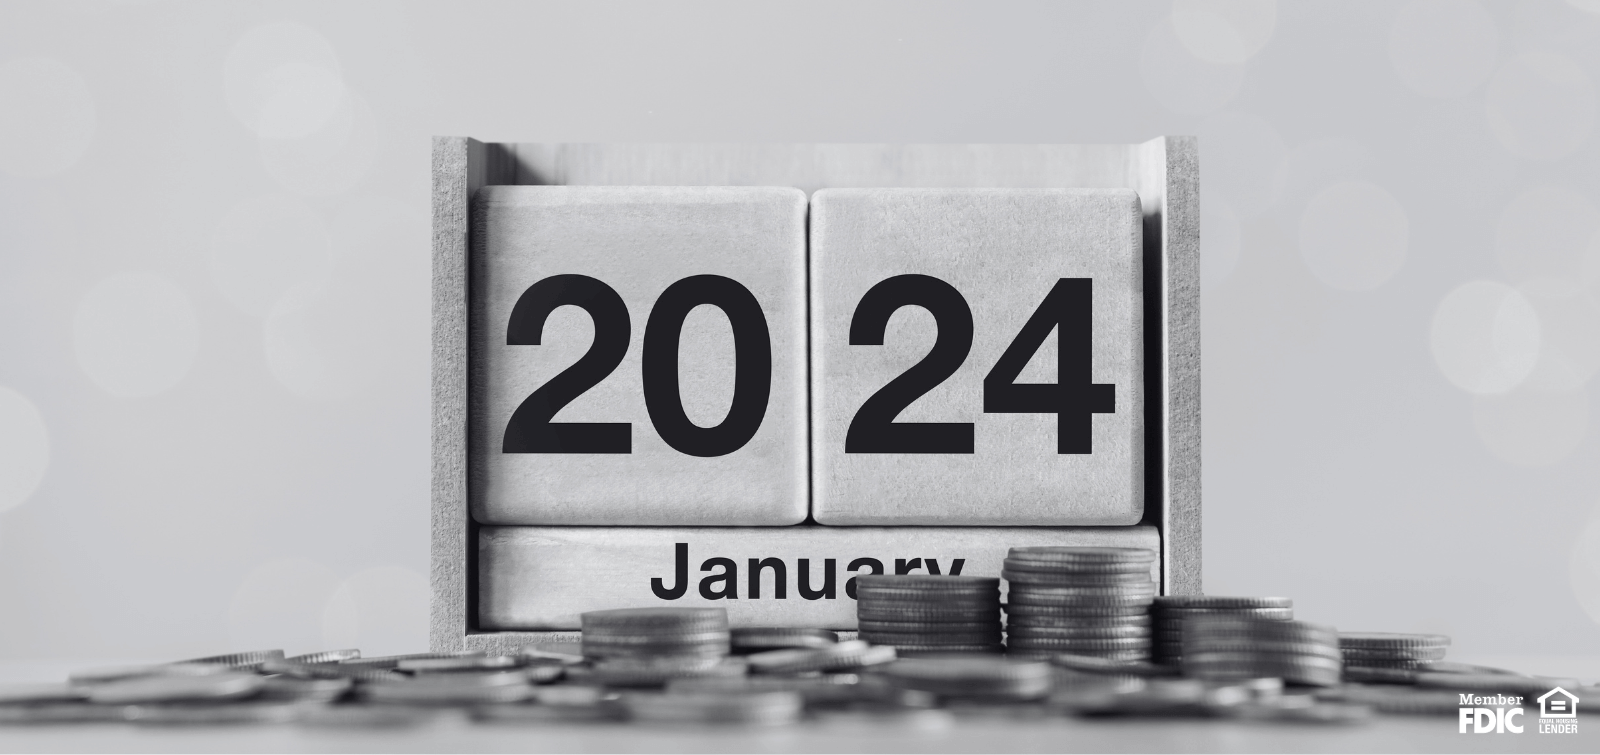 2024 New Year calendar with change in front of it